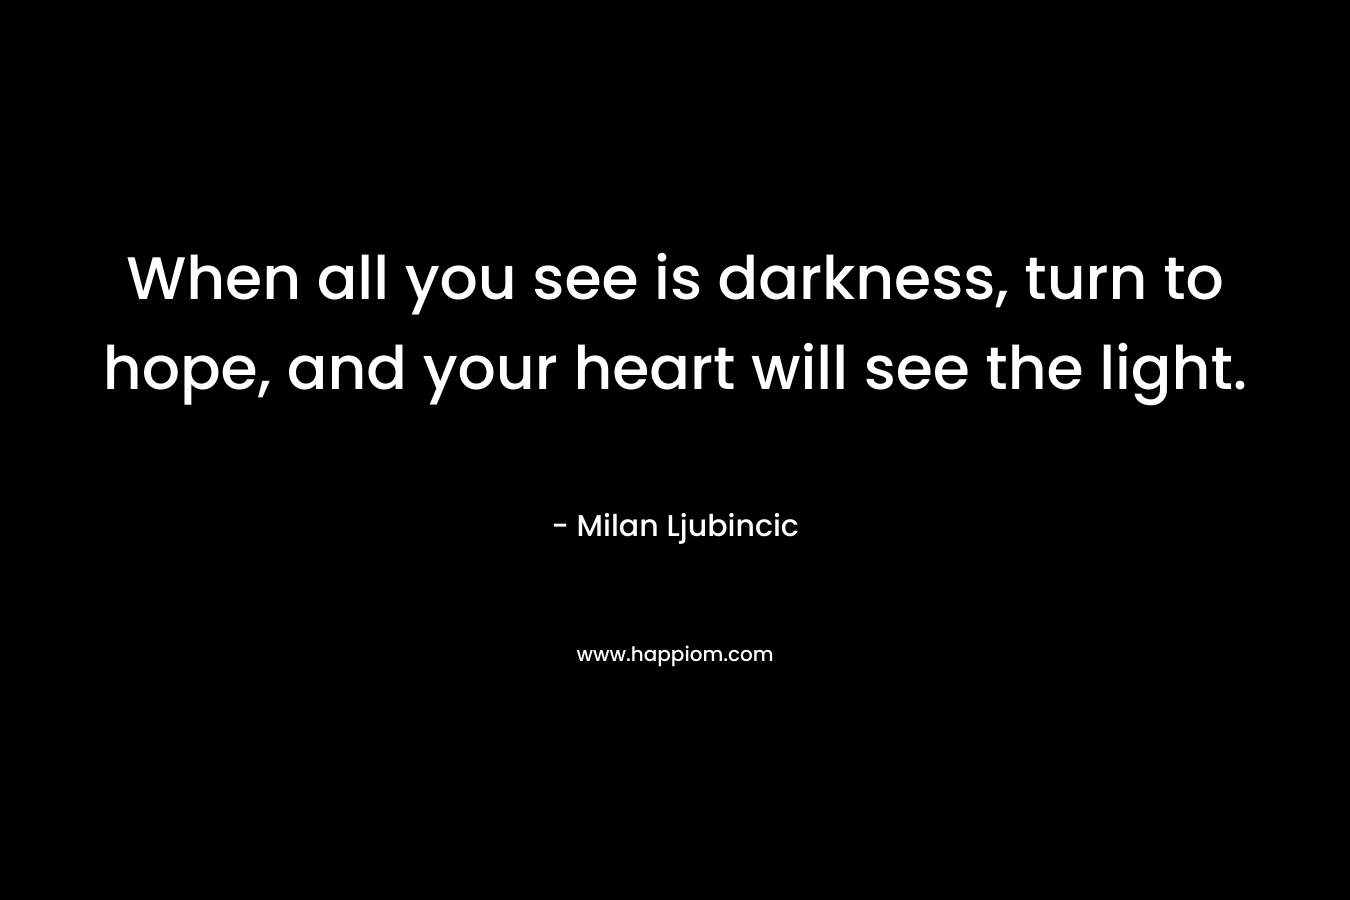 When all you see is darkness, turn to hope, and your heart will see the light.